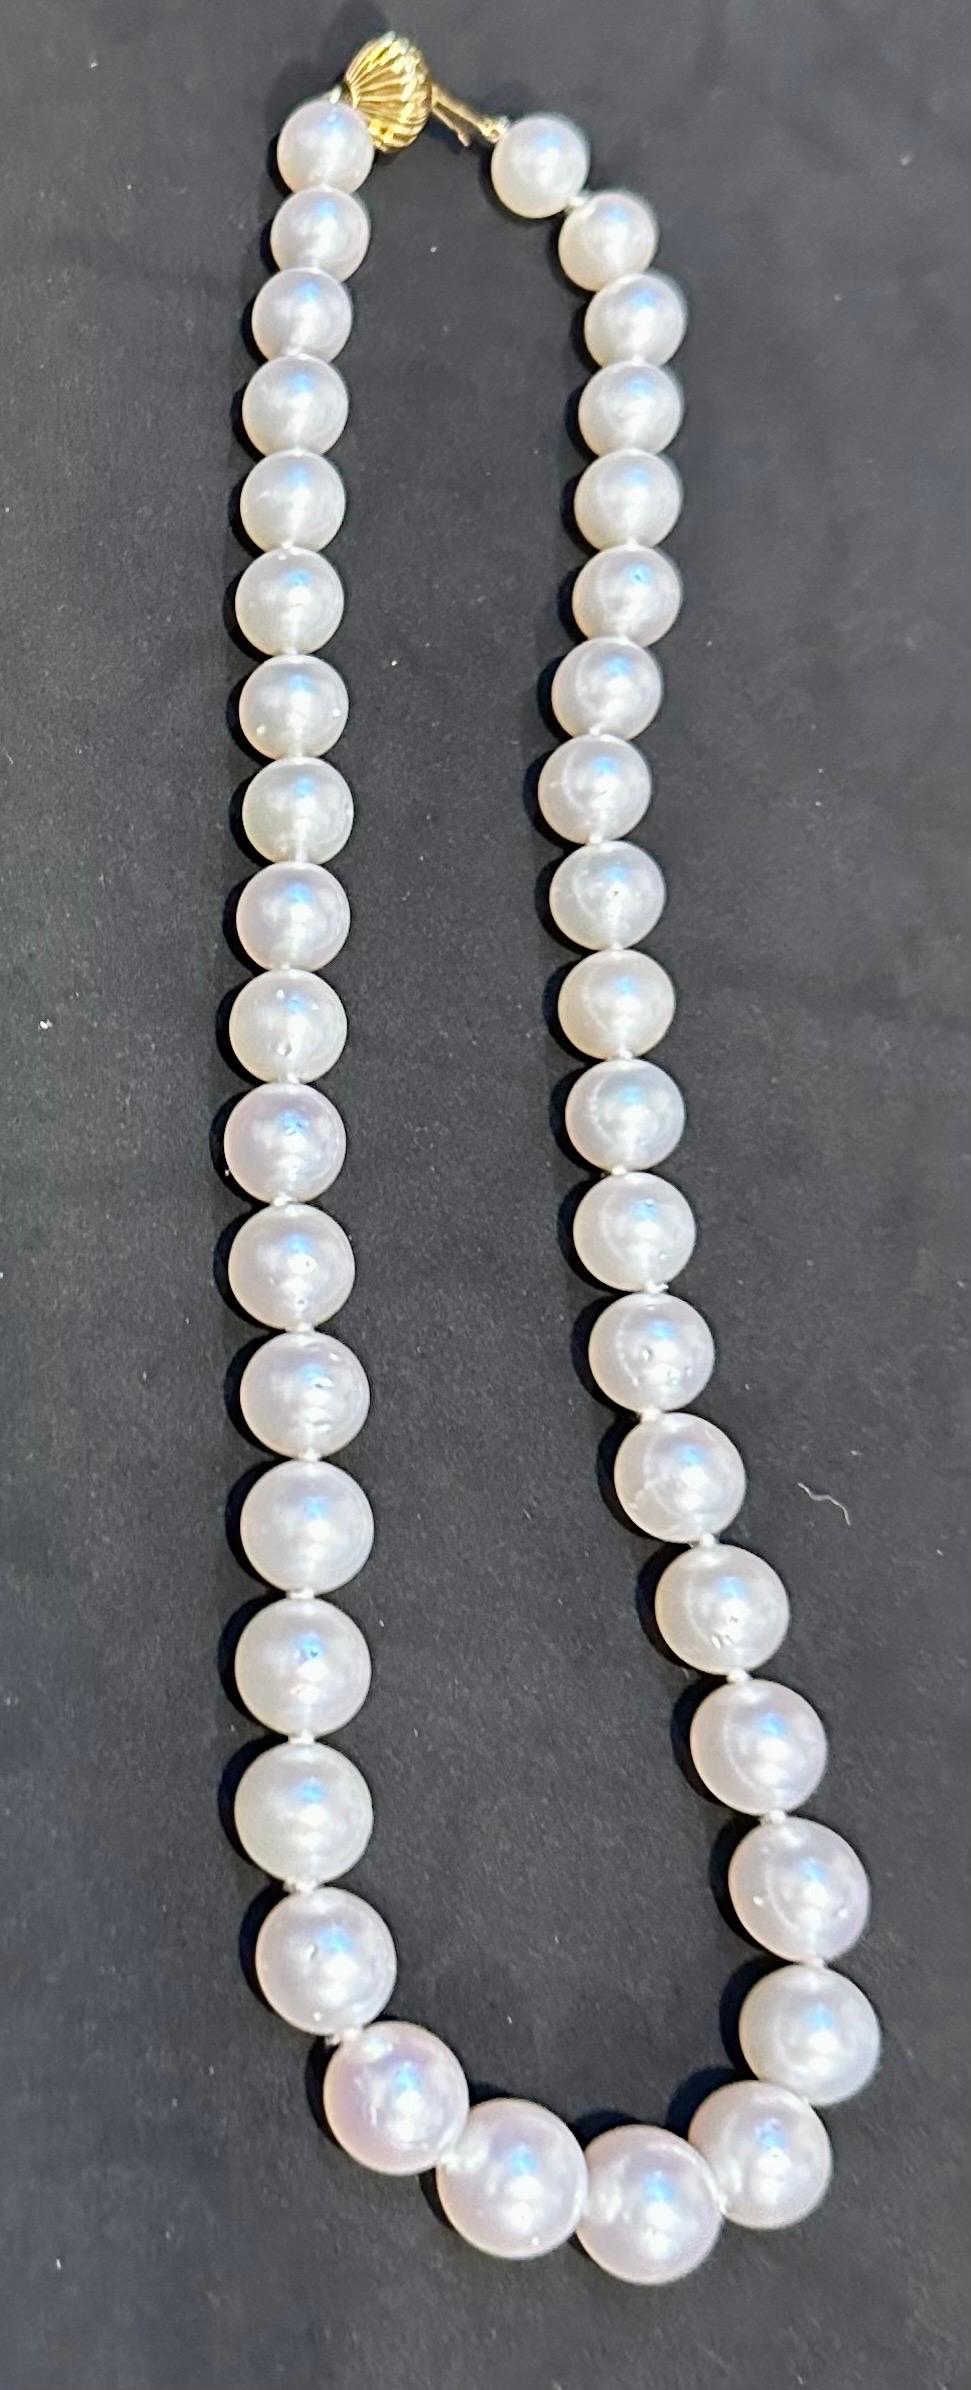 Graduating White South Sea Pearls 9-12mm Strand Necklace 14 Kt Yellow Gold Clasp For Sale 4